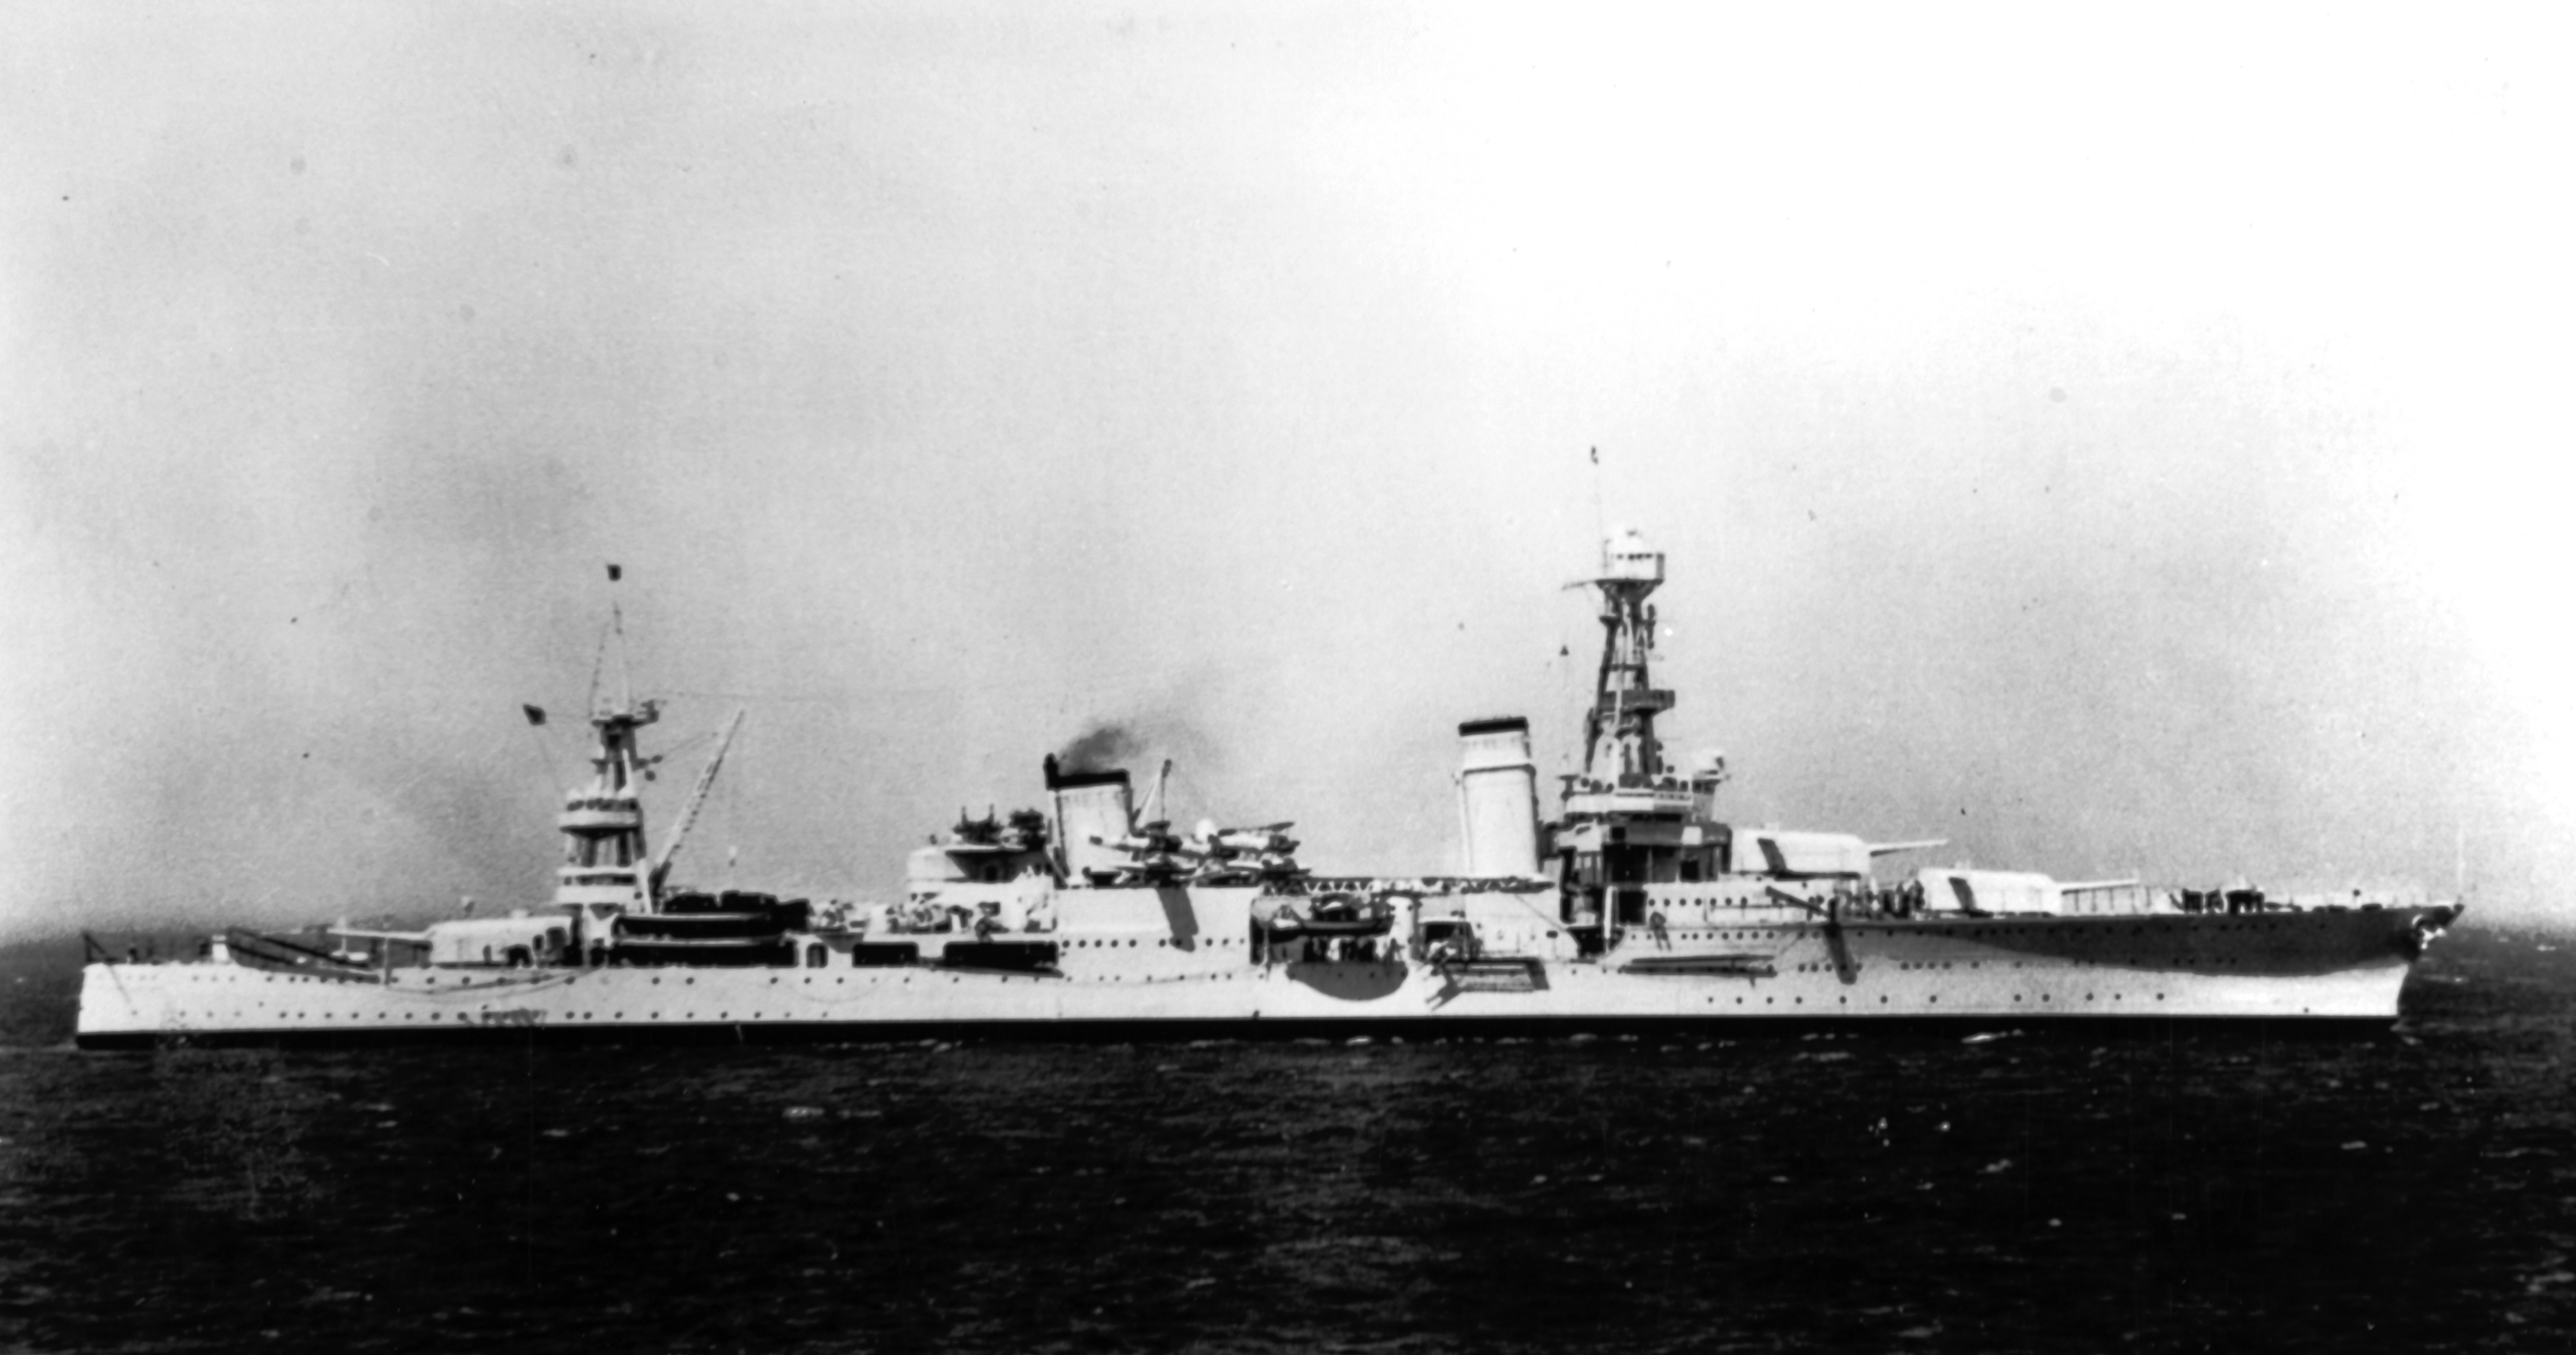 Broadside view of USS Northampton, location unknown, late 1930s.